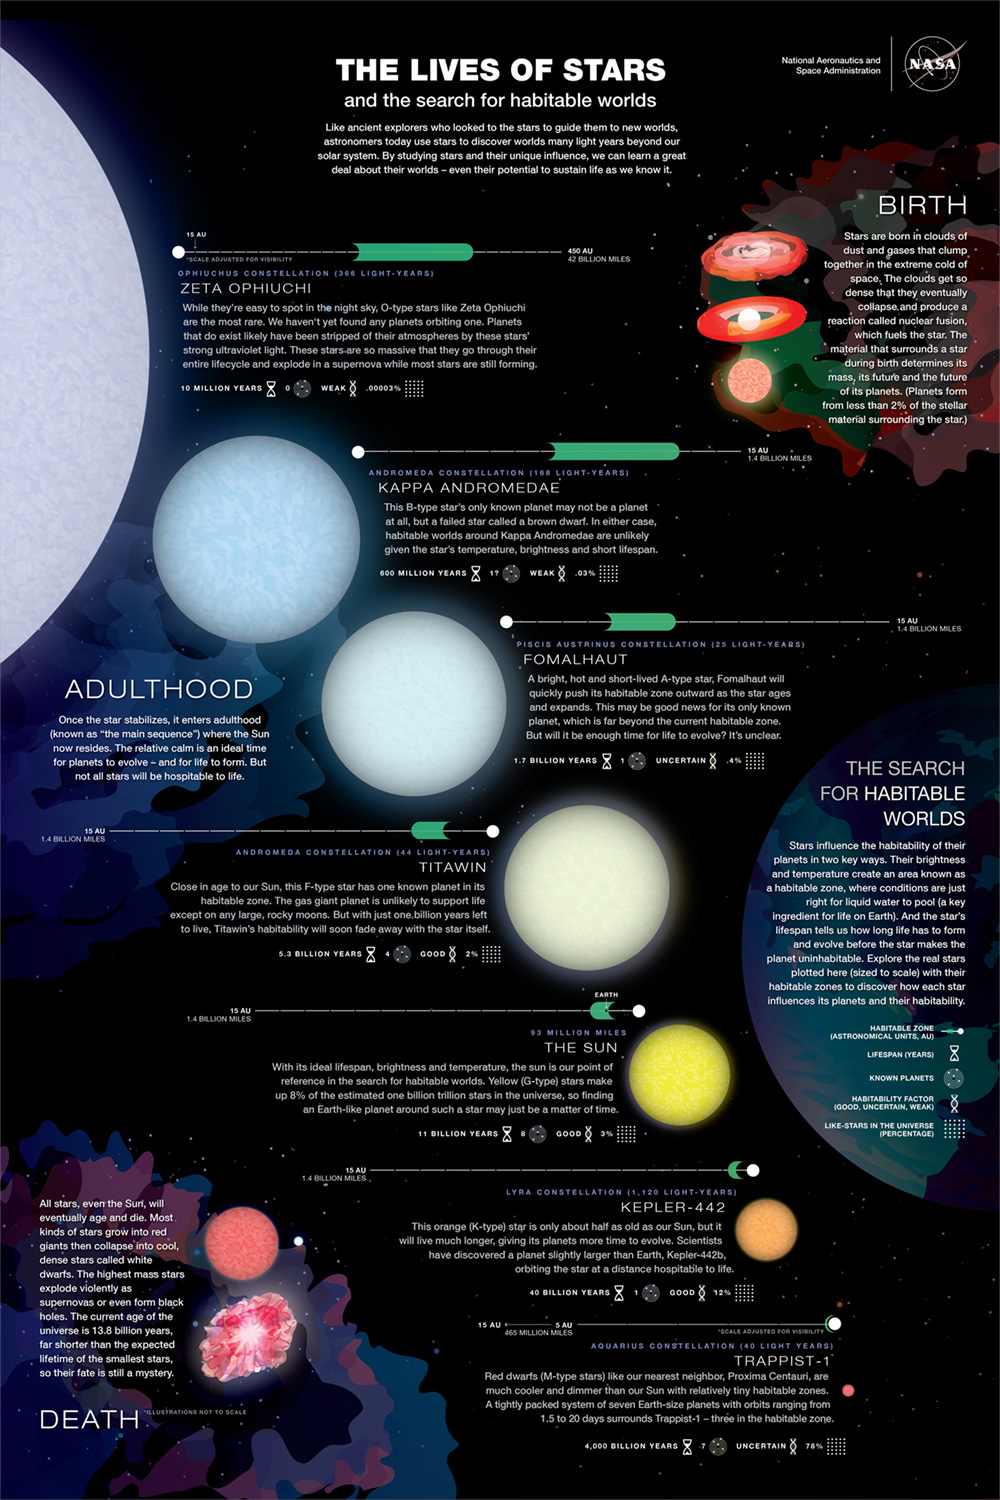 The lives of stars infographic